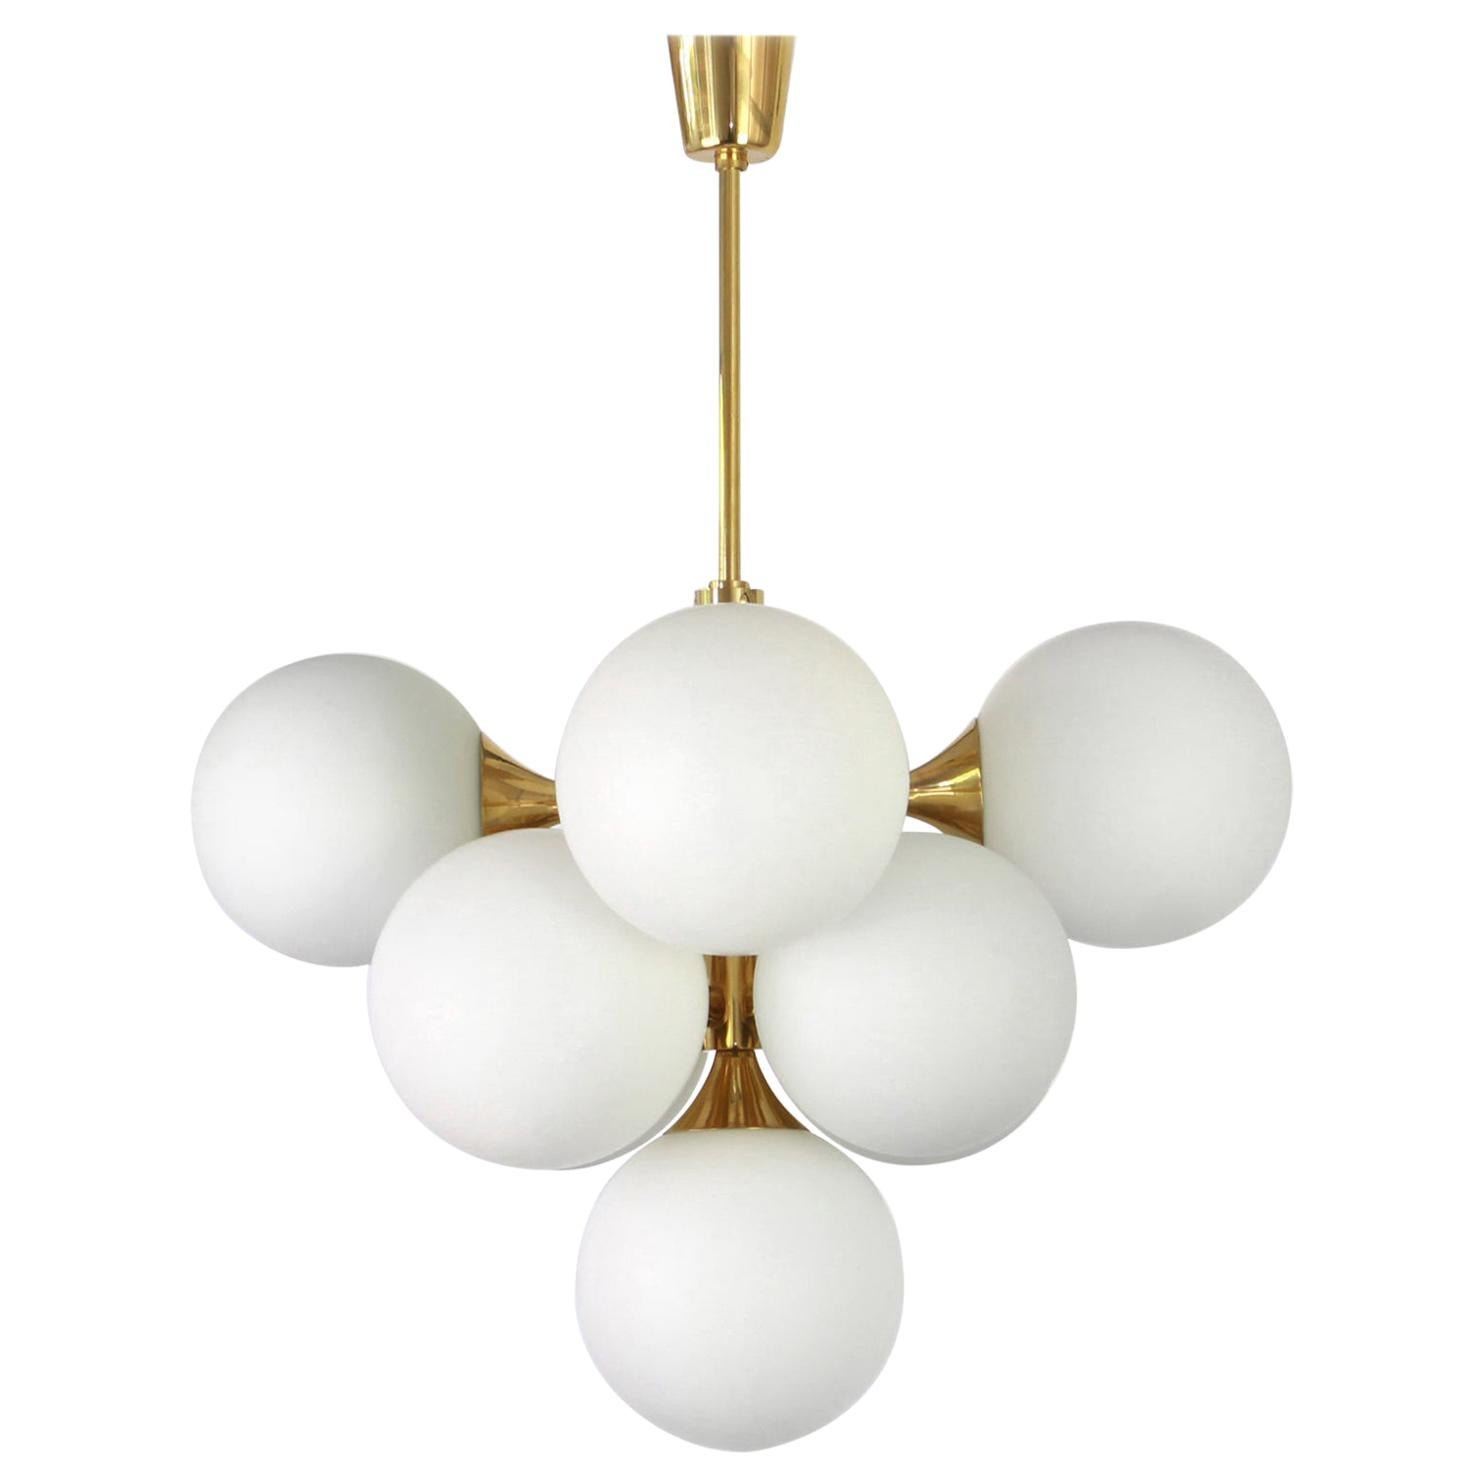 1 of 2 Atomic Brass Chandelier by Kaiser, Germany, 1960s For Sale